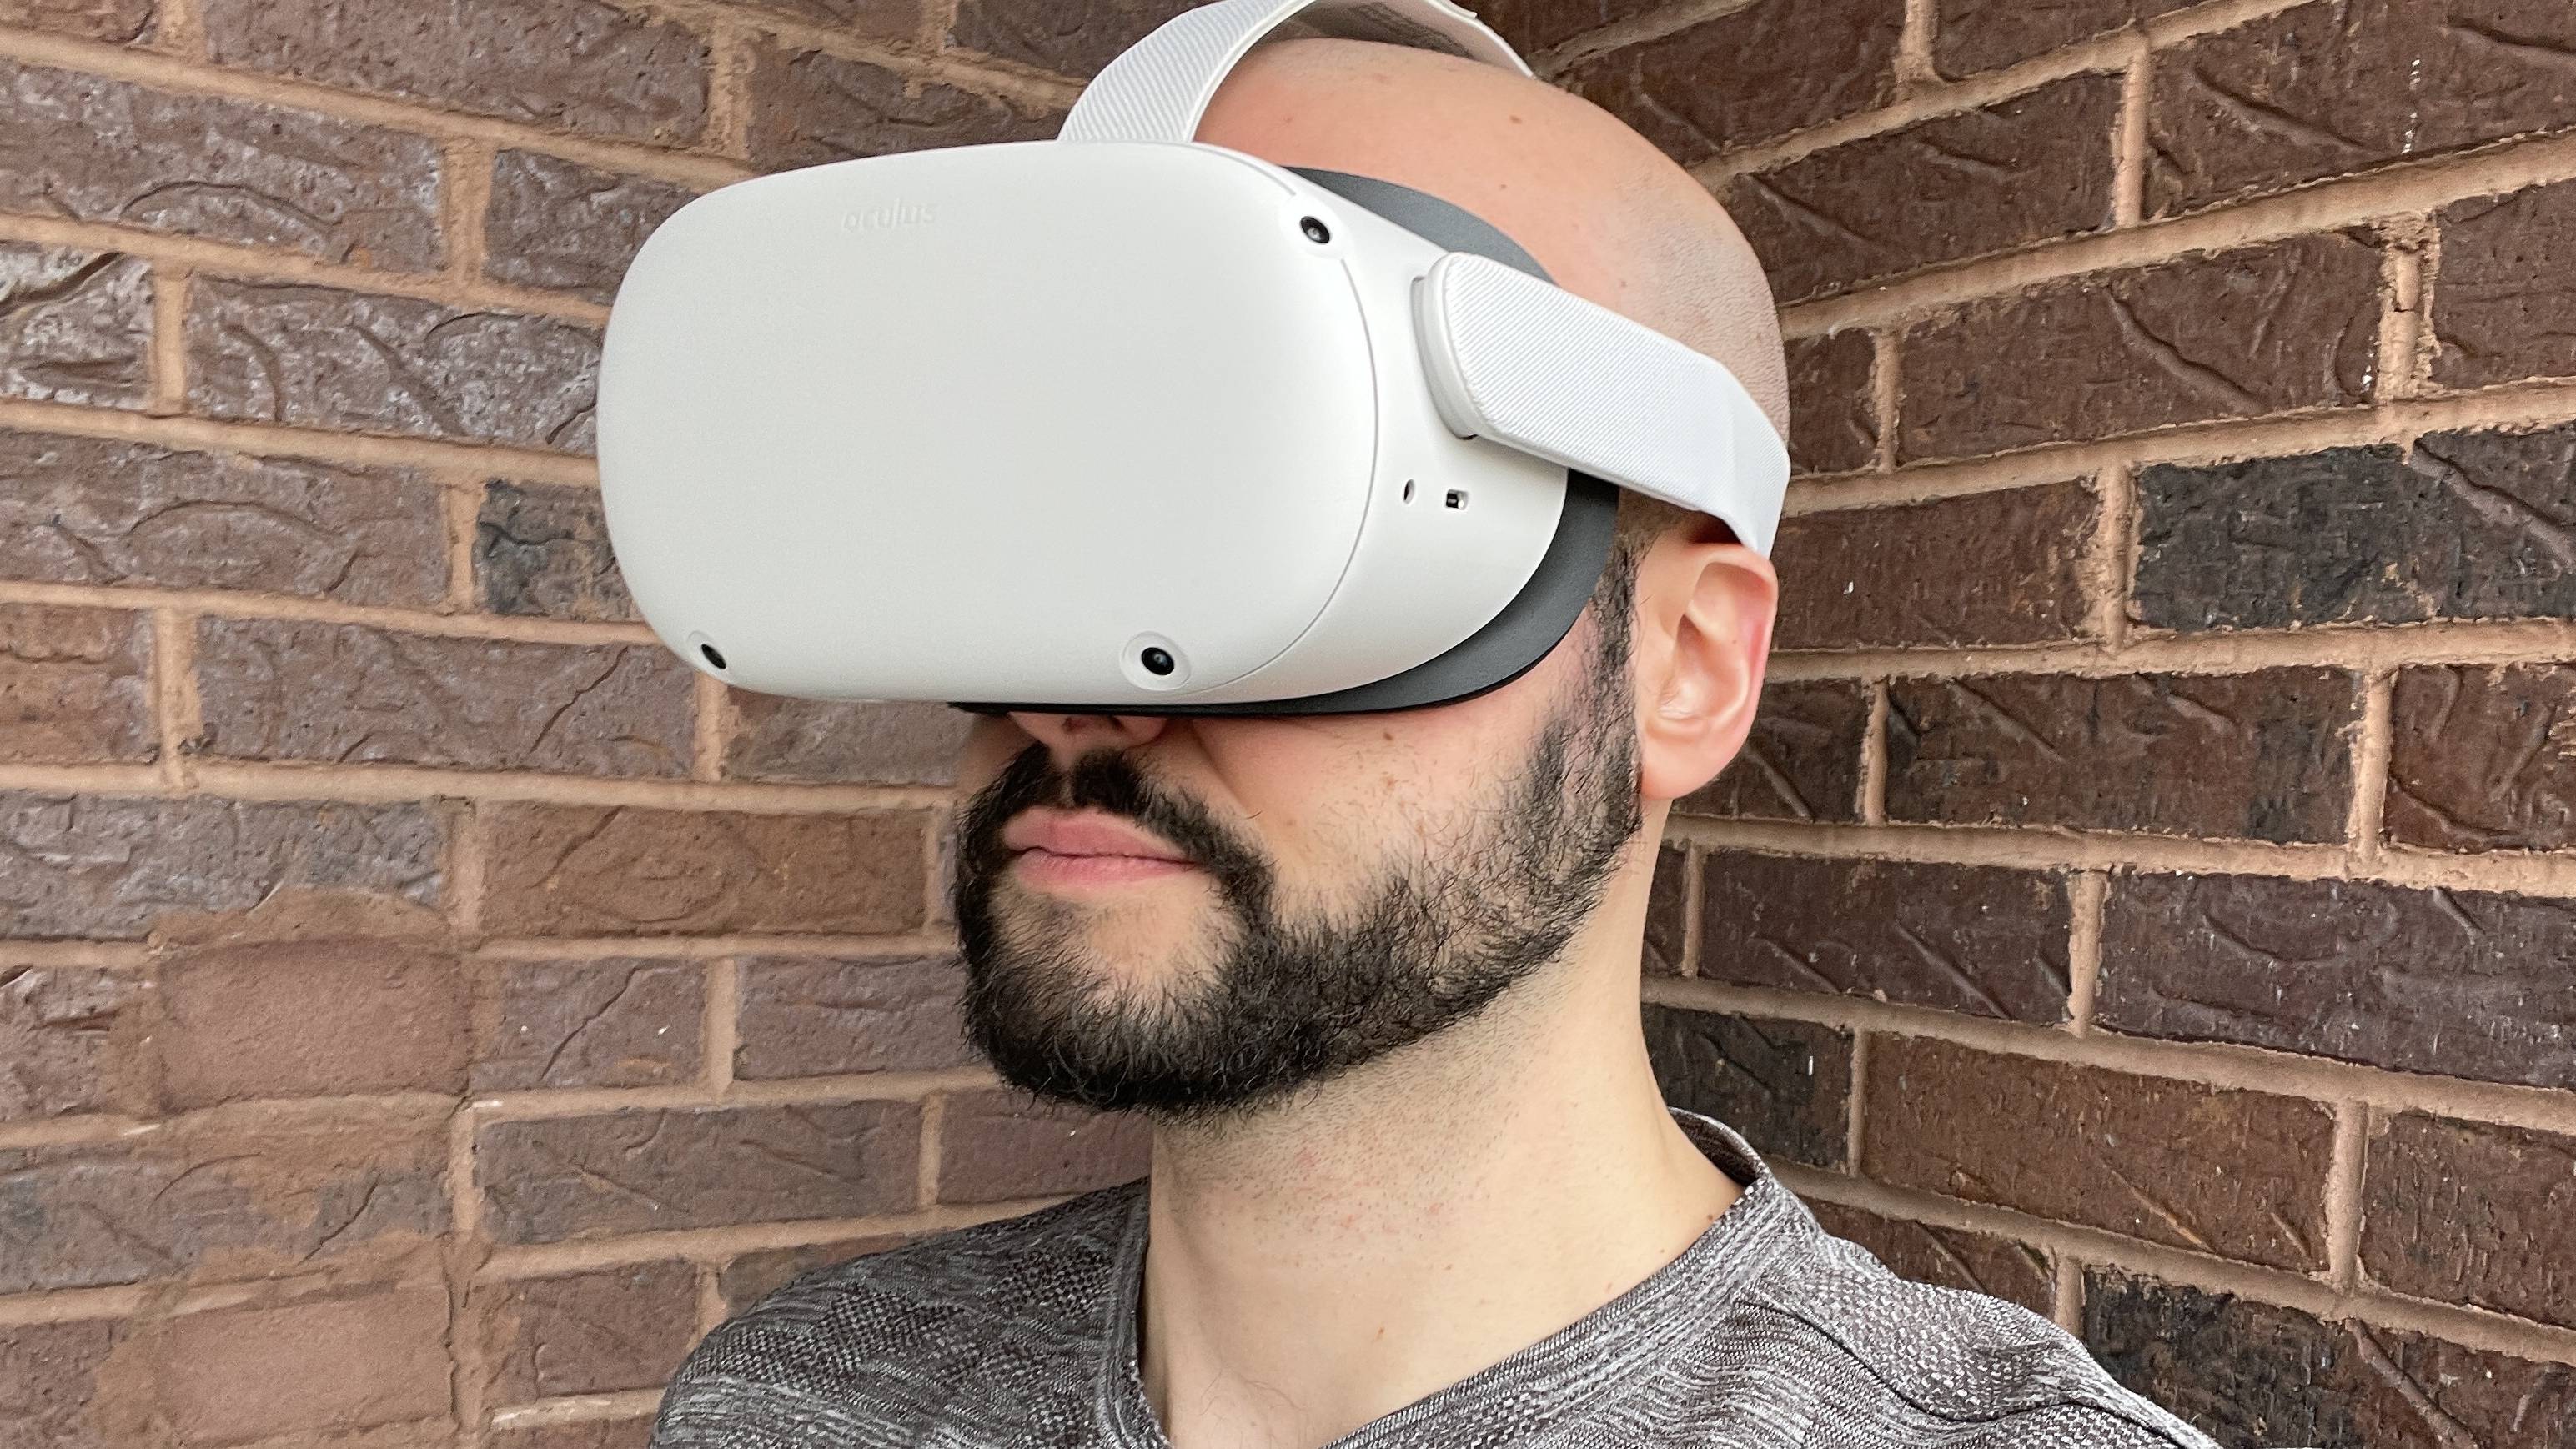 games coming out on oculus quest